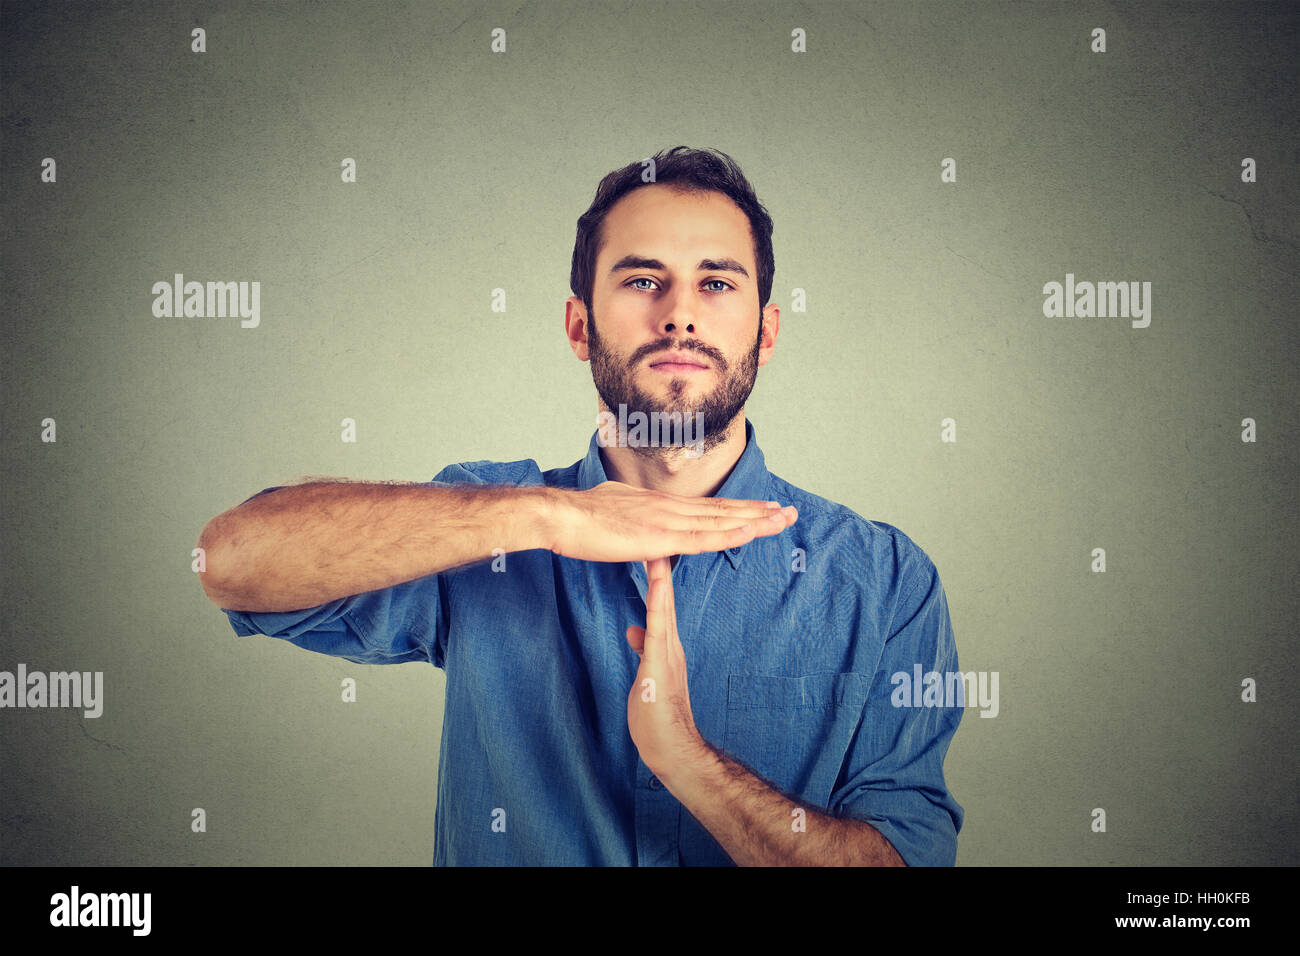 Young man giving showing time out hands gesture isolated on gray wall background Stock Photo